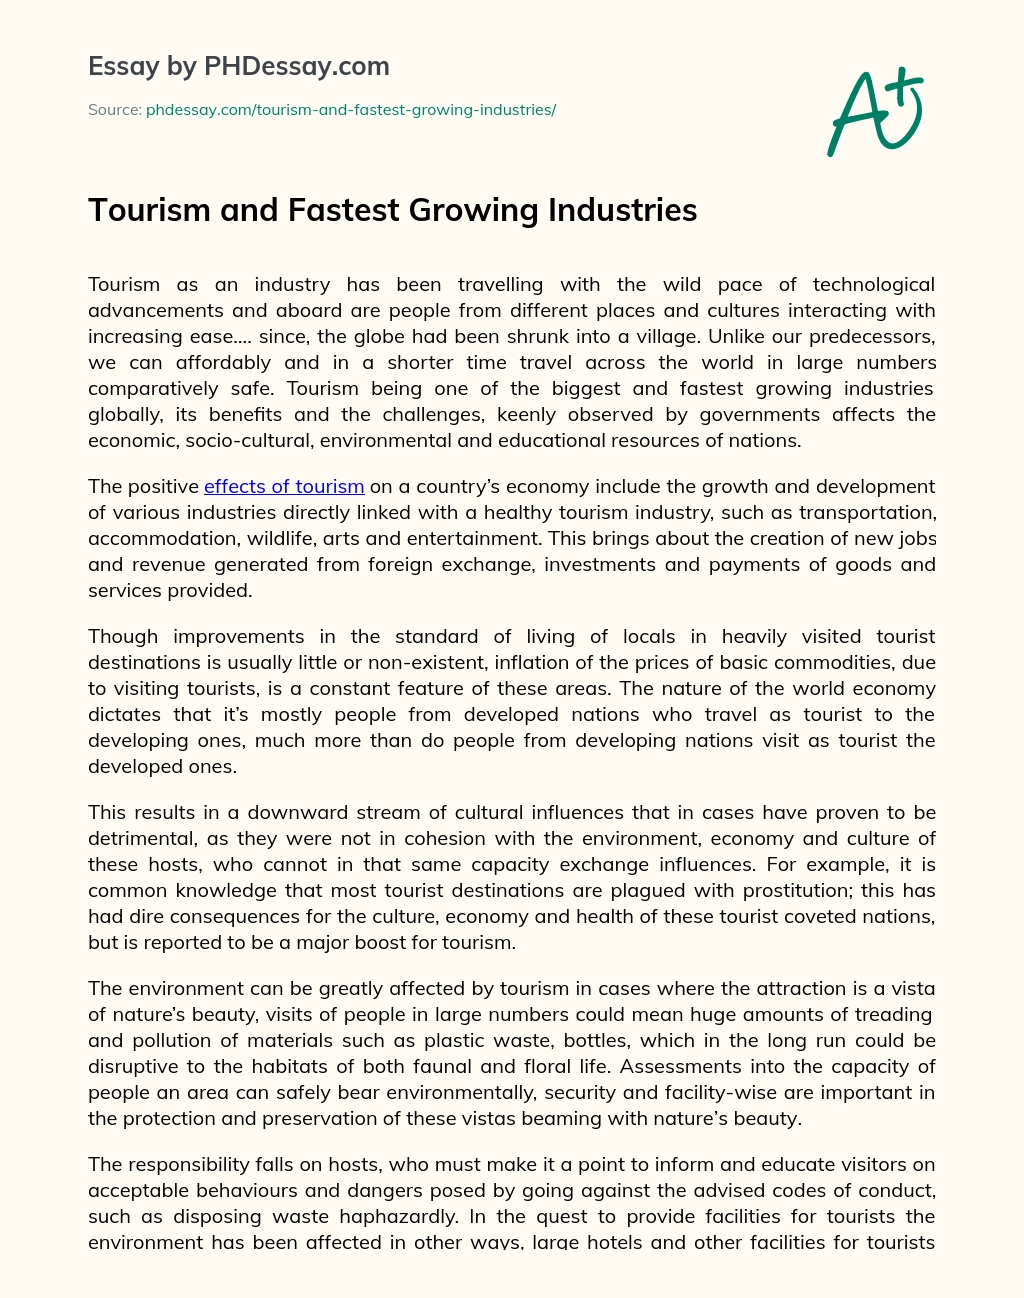 Tourism and Fastest Growing Industries essay